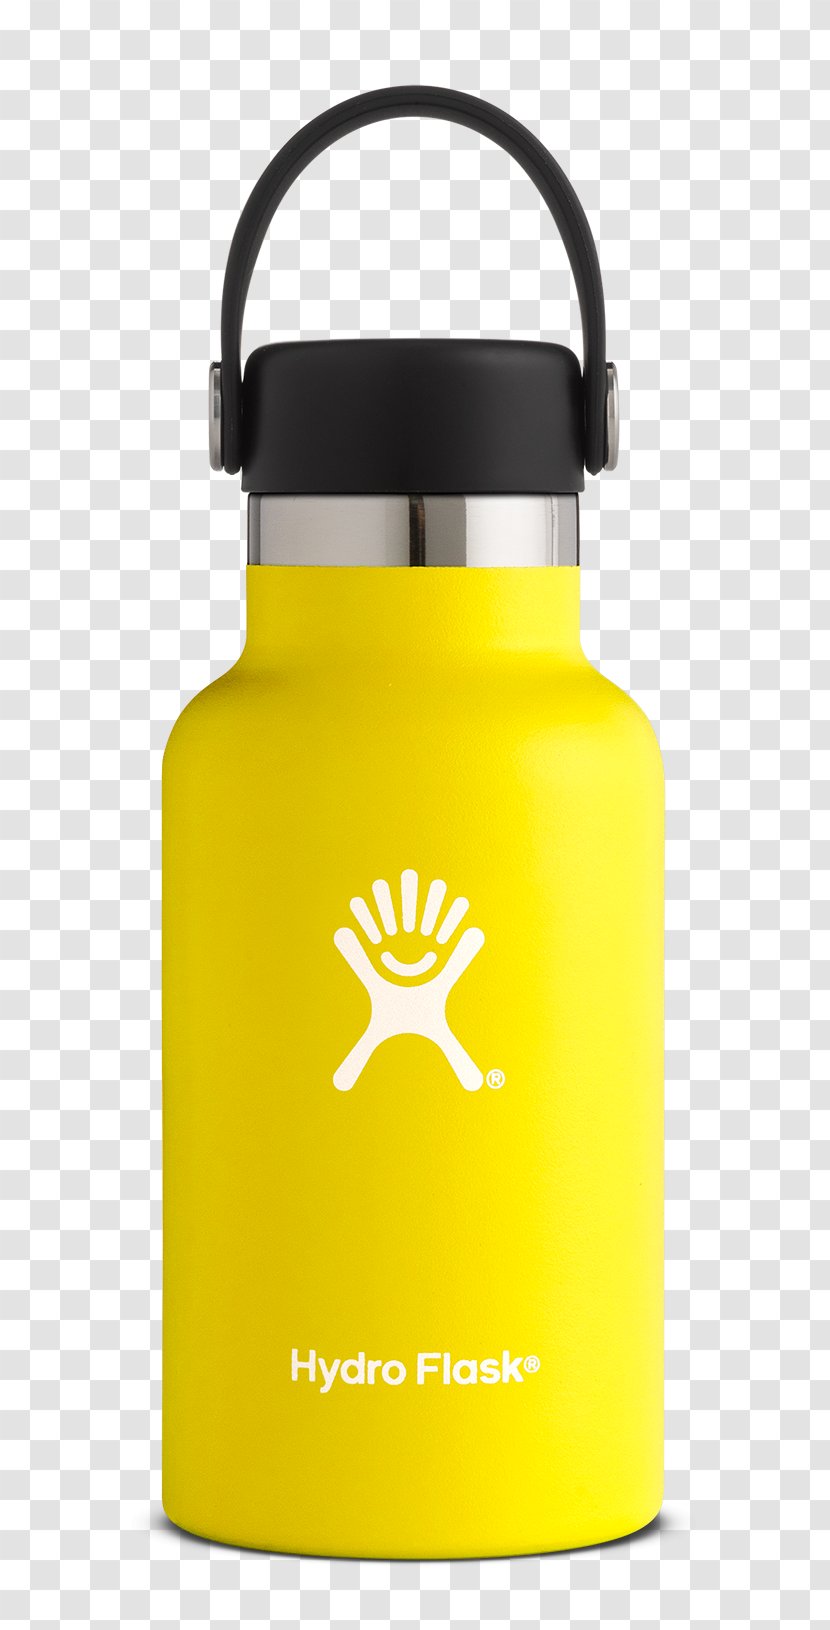 Water Bottles Drink Ounce Hydro Flask 21 Oz Vacuum Insulated Stainless Steel Bottle, Standard Mouth W/loop Cap, Cobalt - 24oz Bottle Transparent PNG